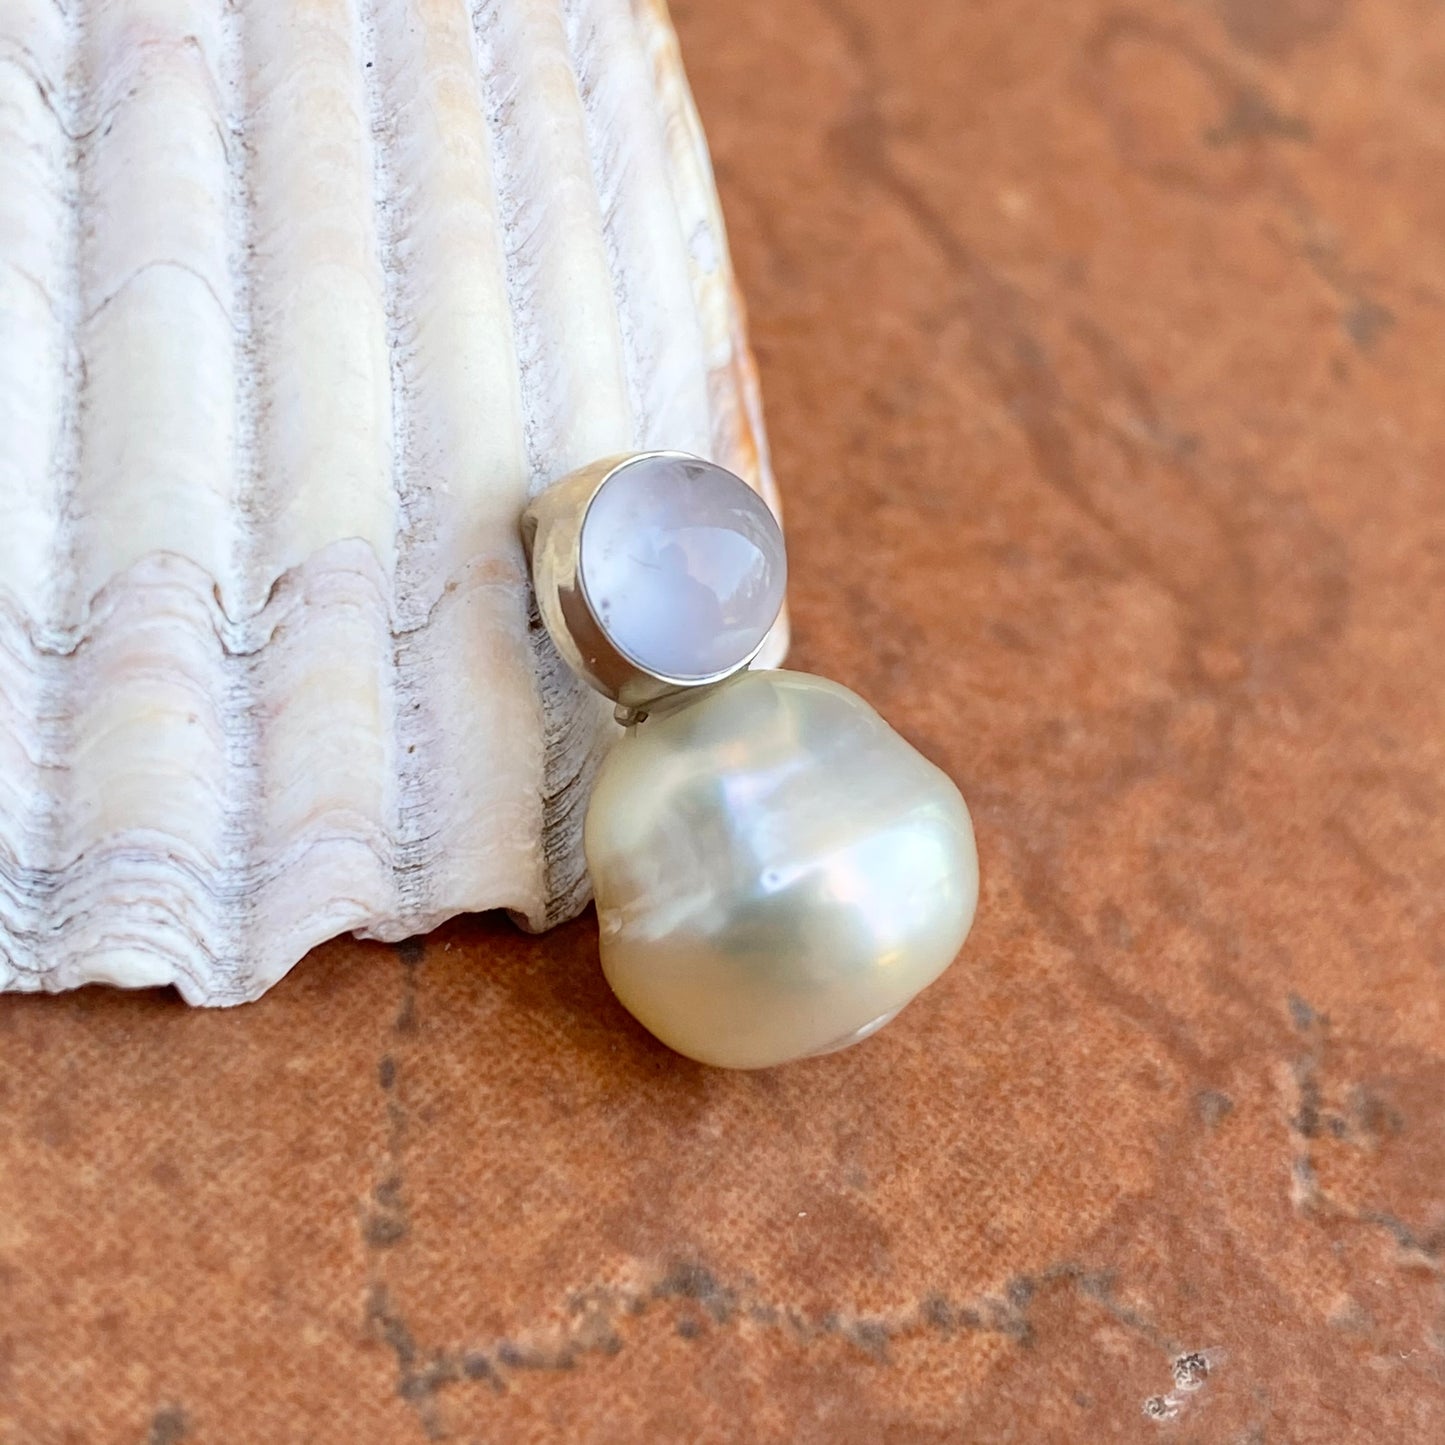 14KT White Gold Chalcedony + 11mm Paspaley South Sea Pearl Pendant Slide - Legacy Saint Jewelry